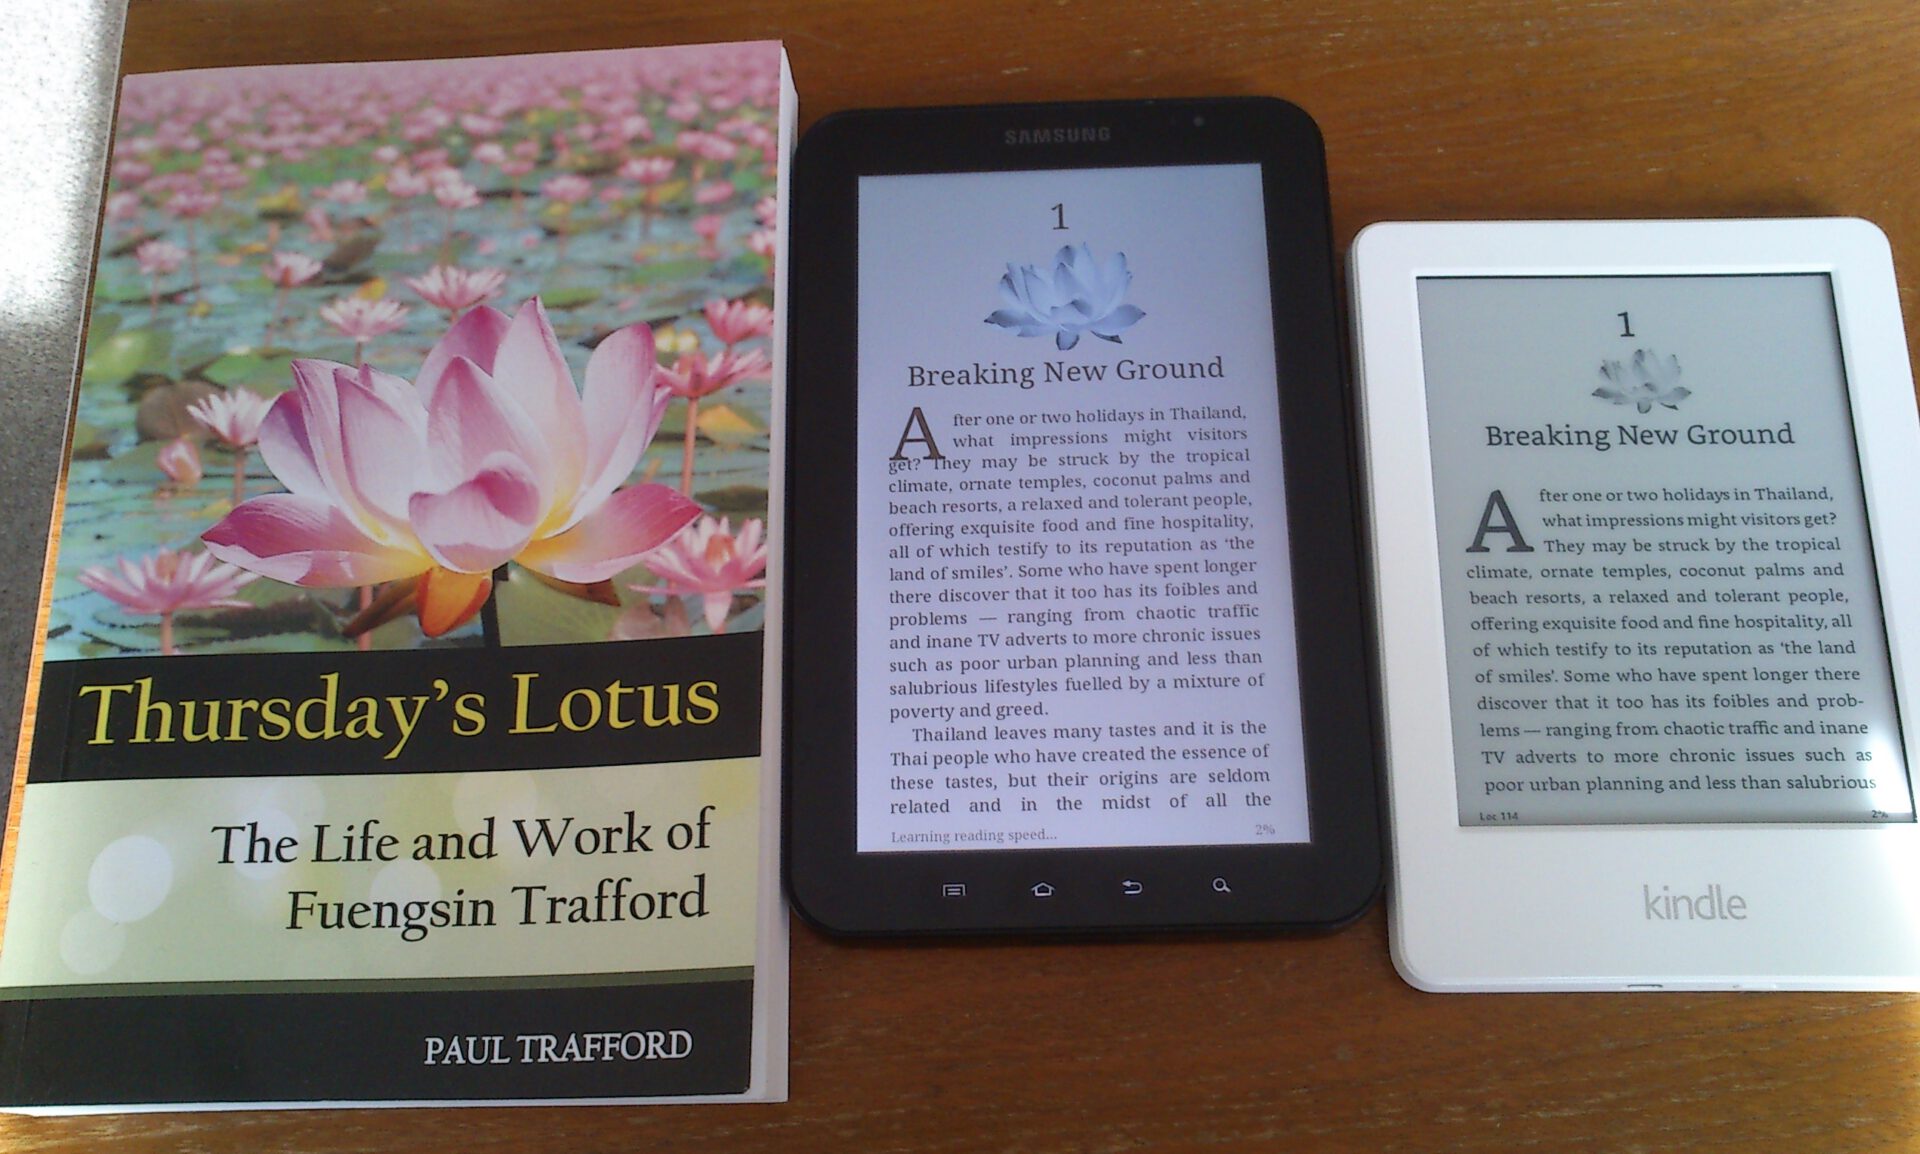 A shot of the paperback version of Thursday's Lotus, alongside the Galaxy Tab and a Kindle.